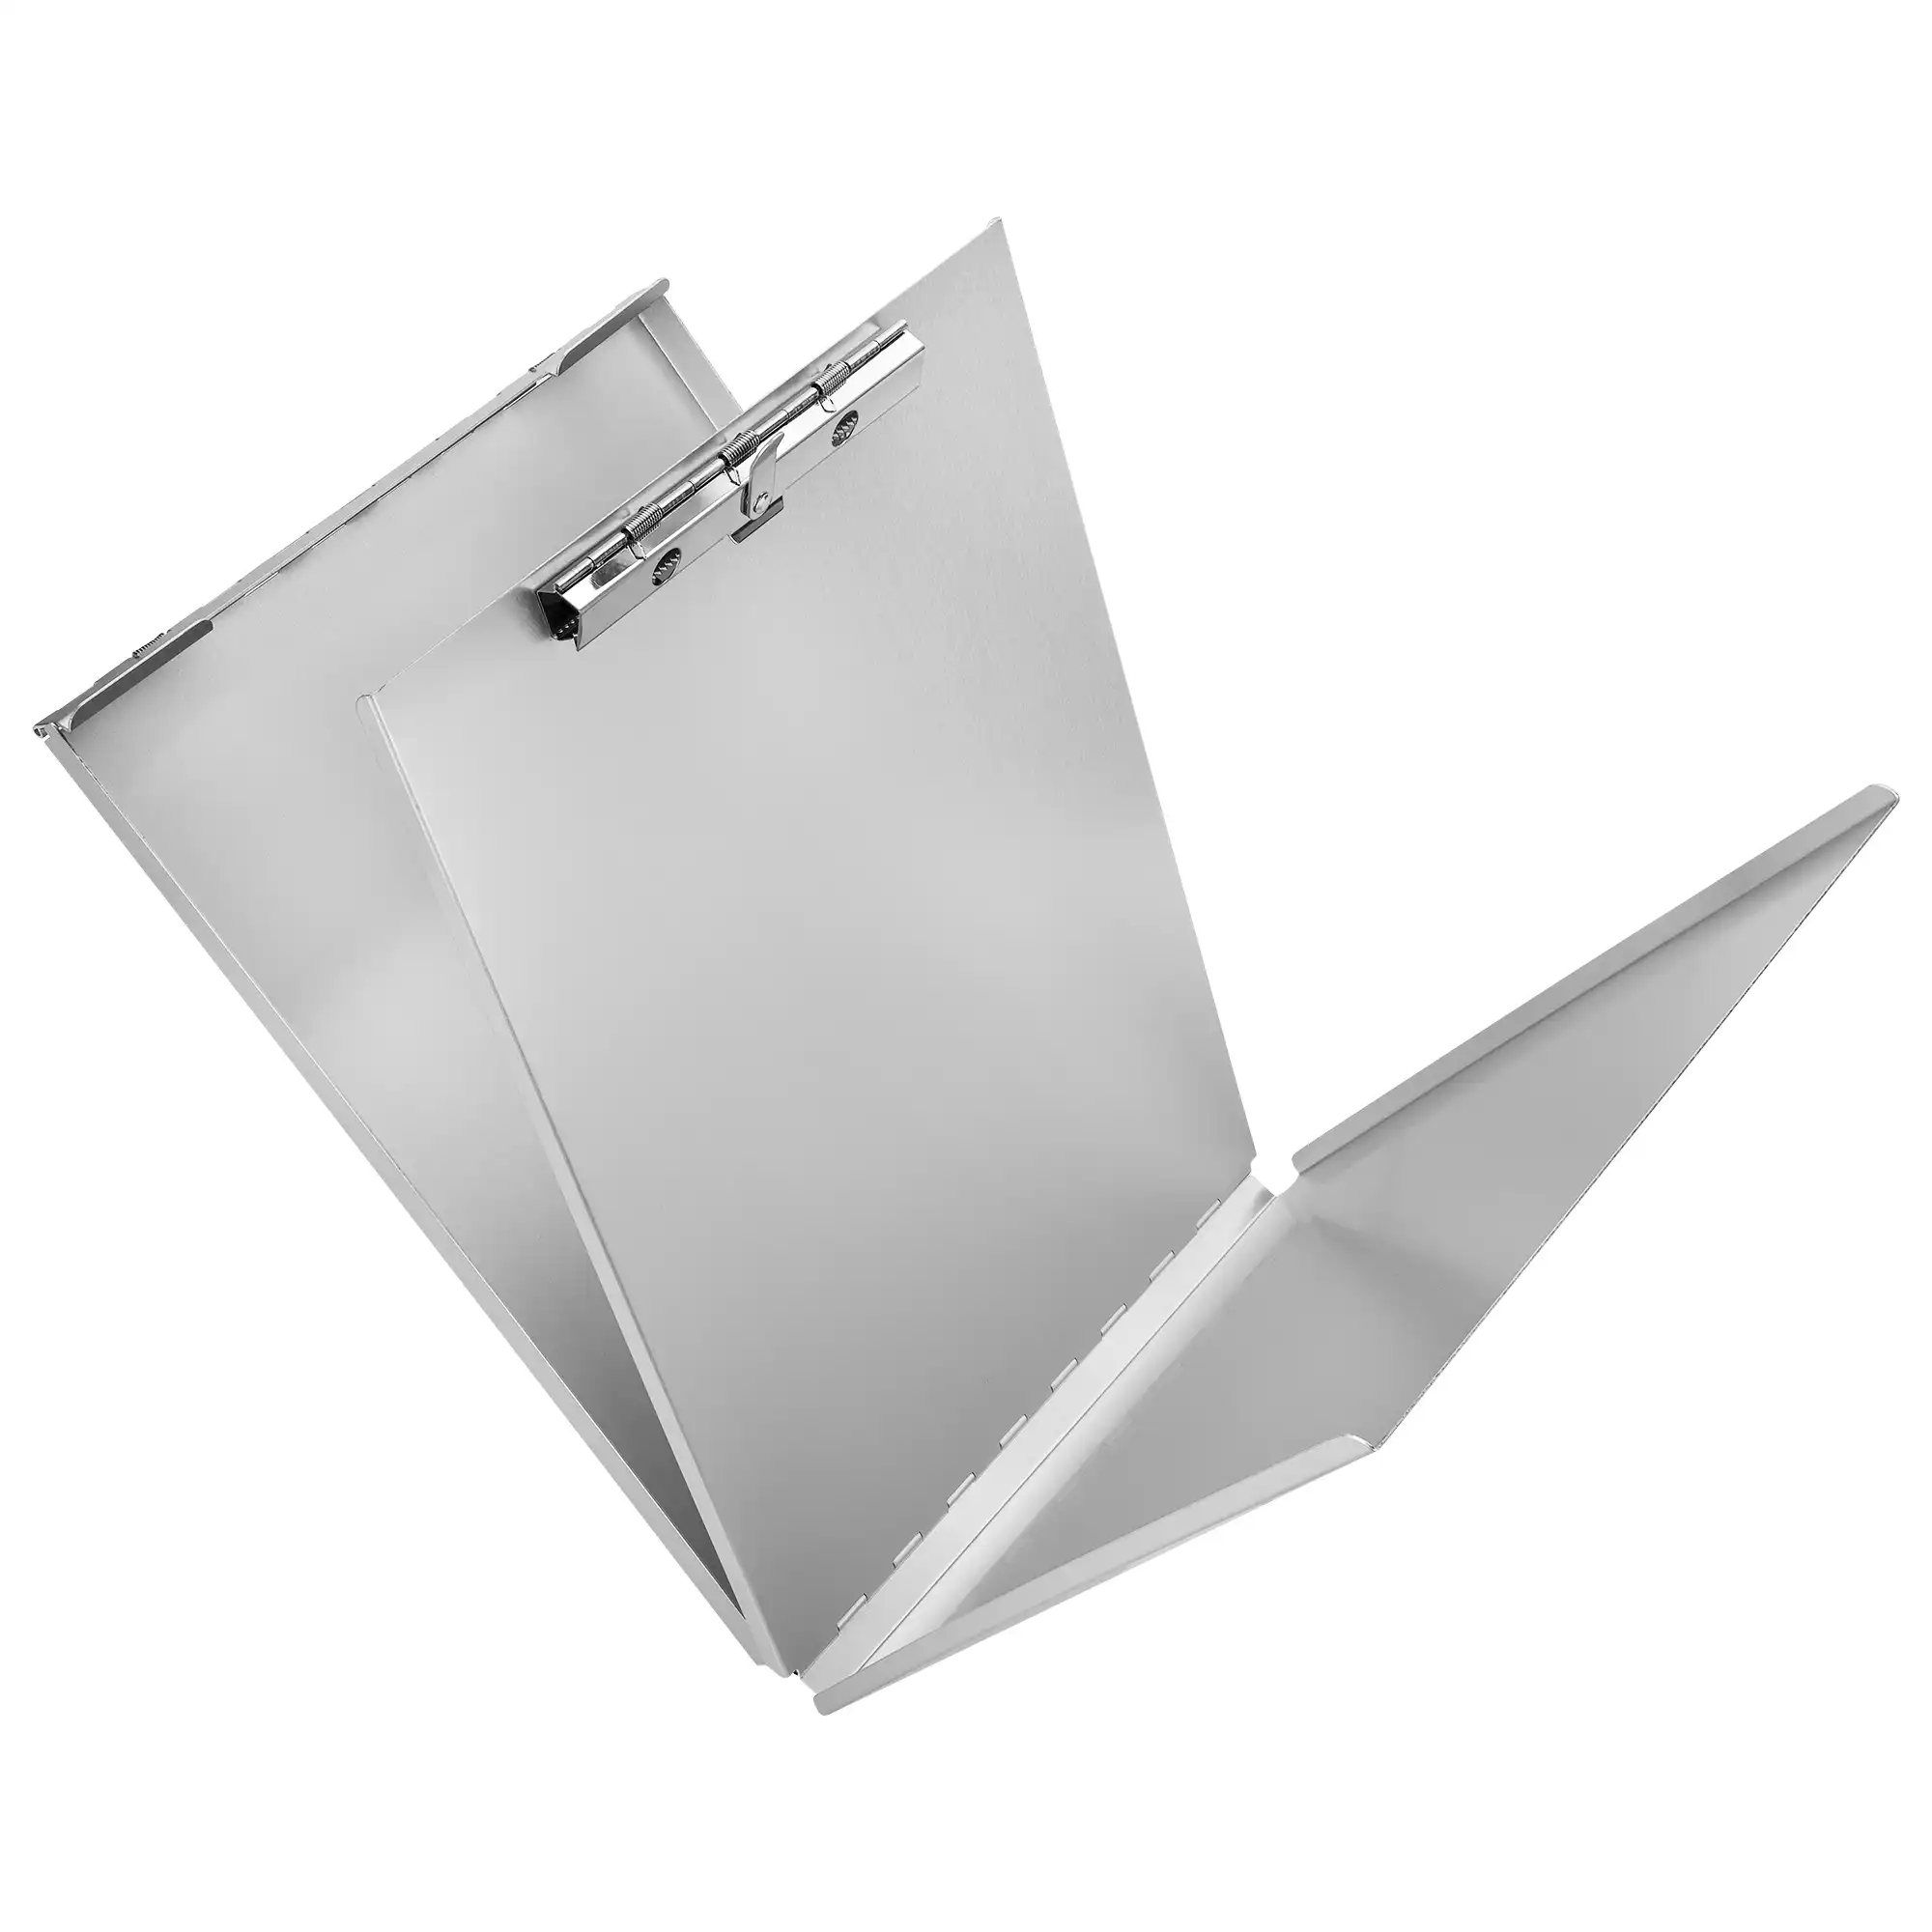 Läufer form holder, aluminium, with tray and intermediate layer Läufer clipboard, aluminium, top opening, with storage compartment